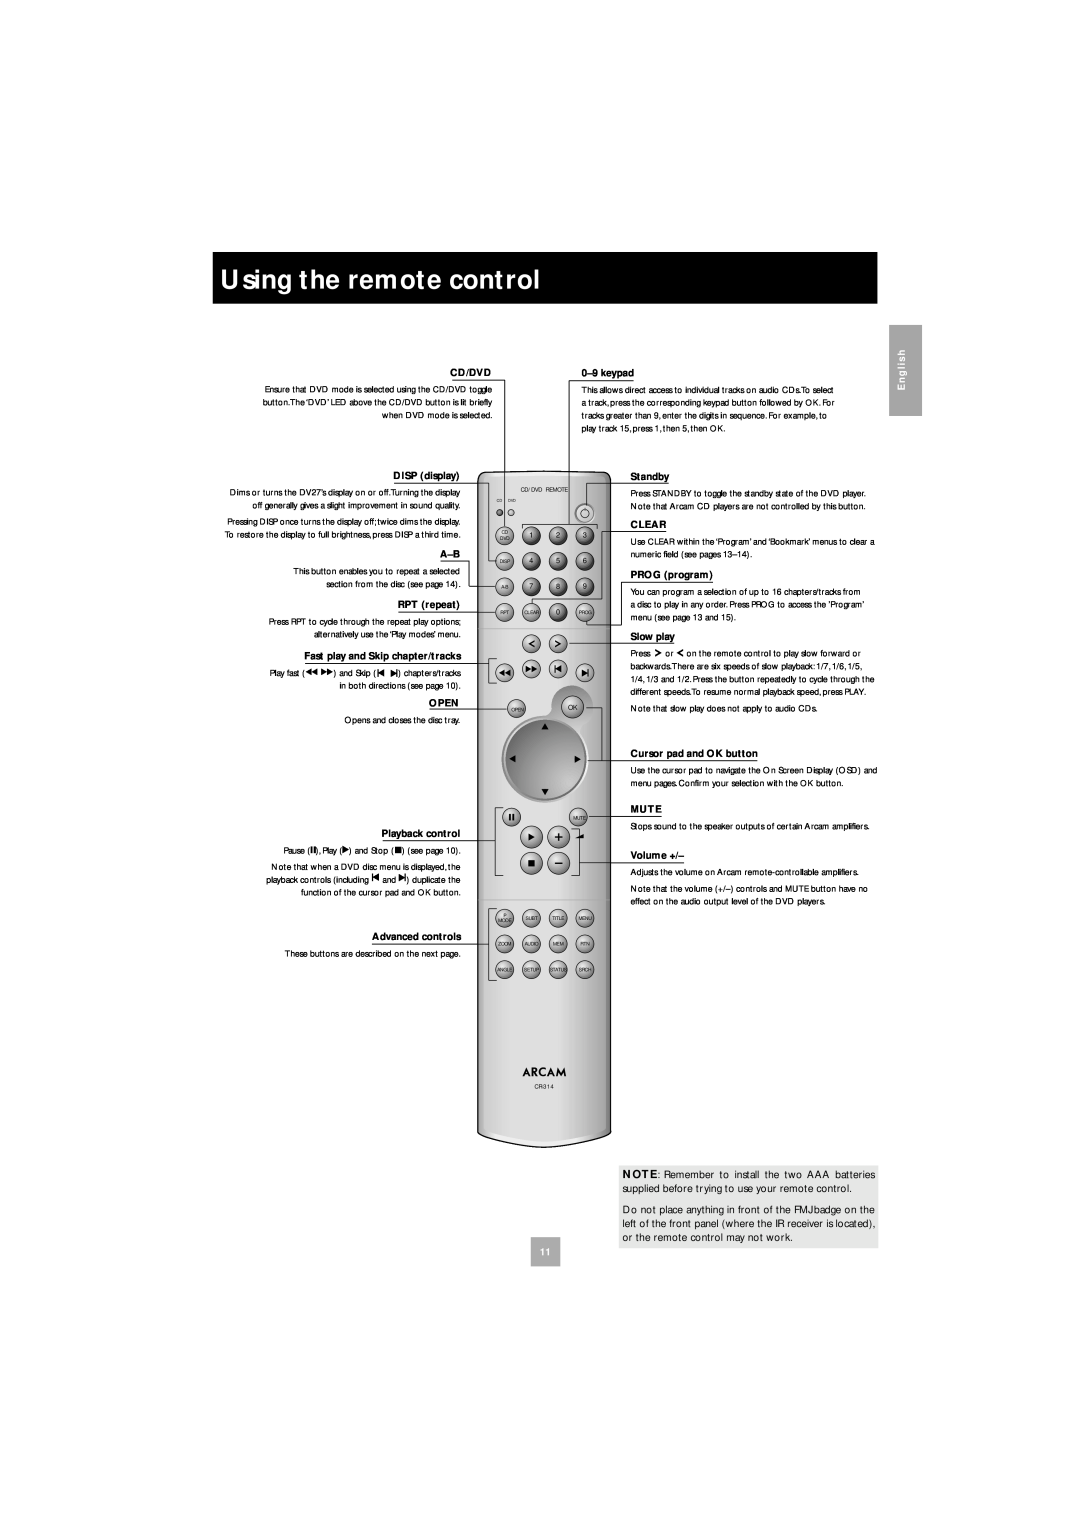 Arcam DV27 manual Using the remote control, or the remote control may not work, English 